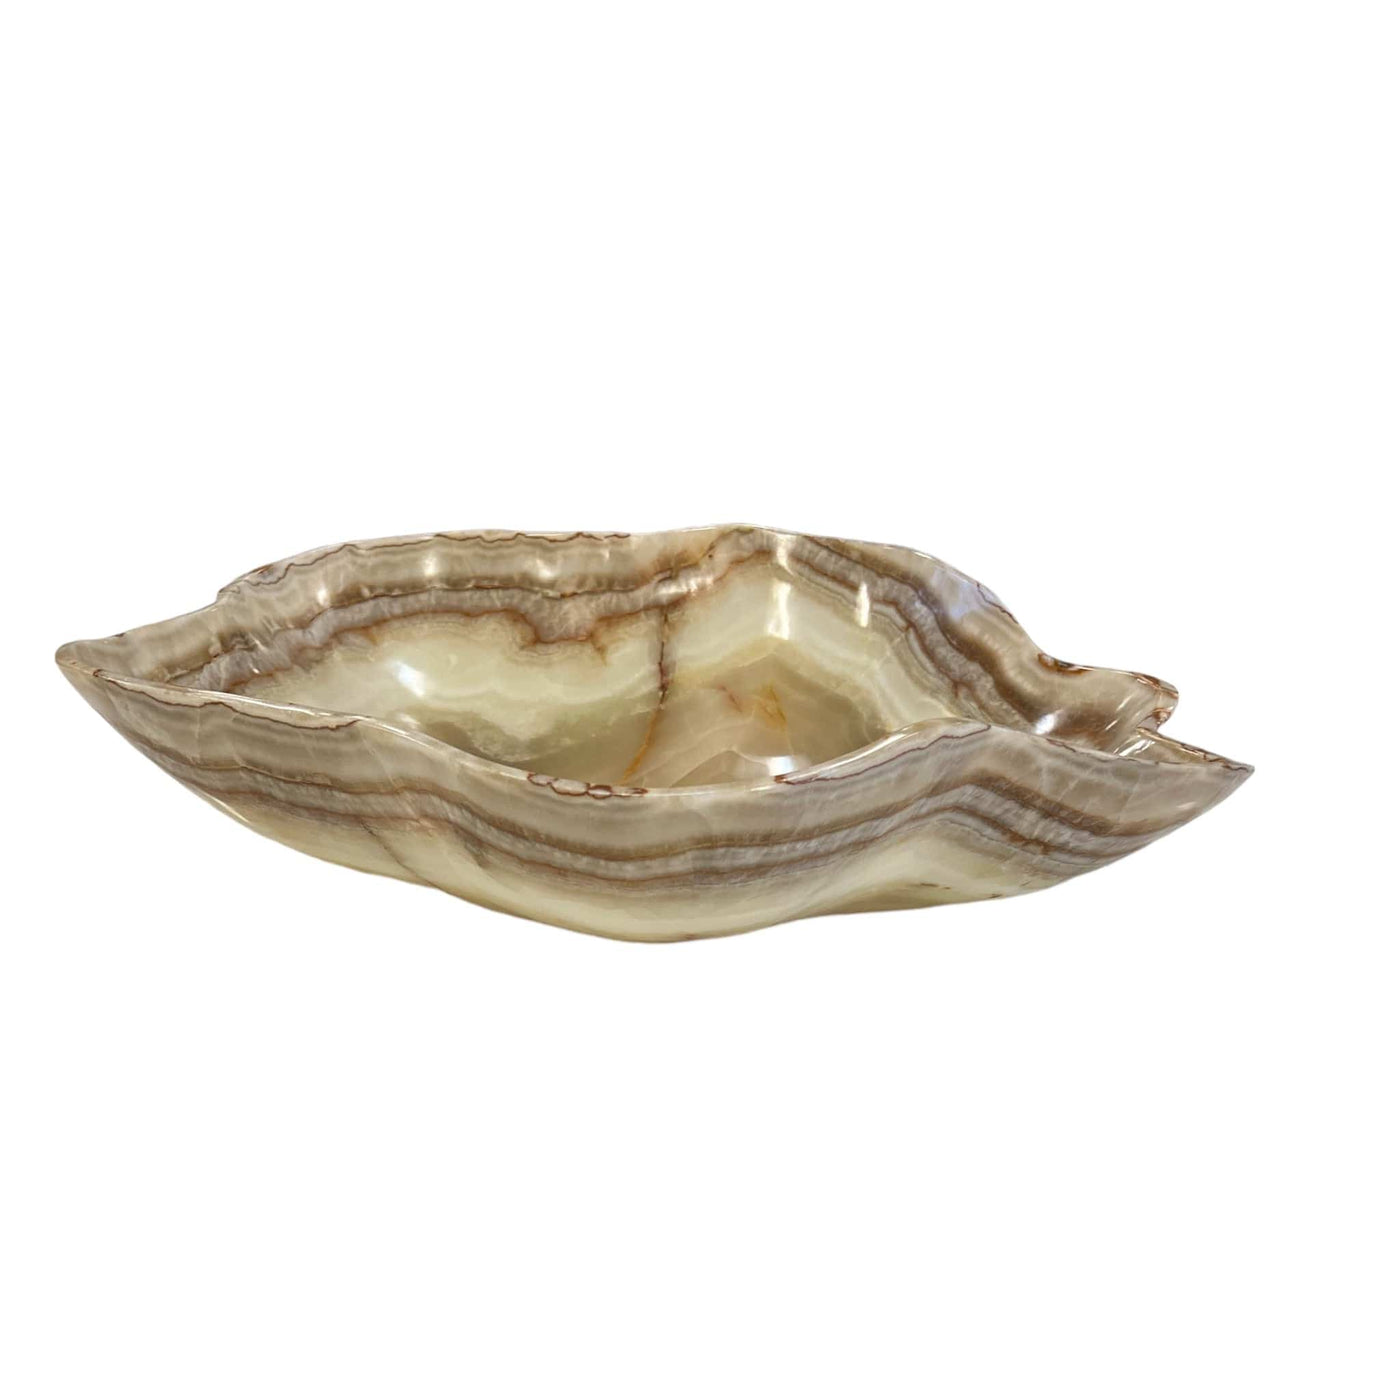 Large mexican onyx bowl displayed on a white background. It is shades of cream, tan, and brown.